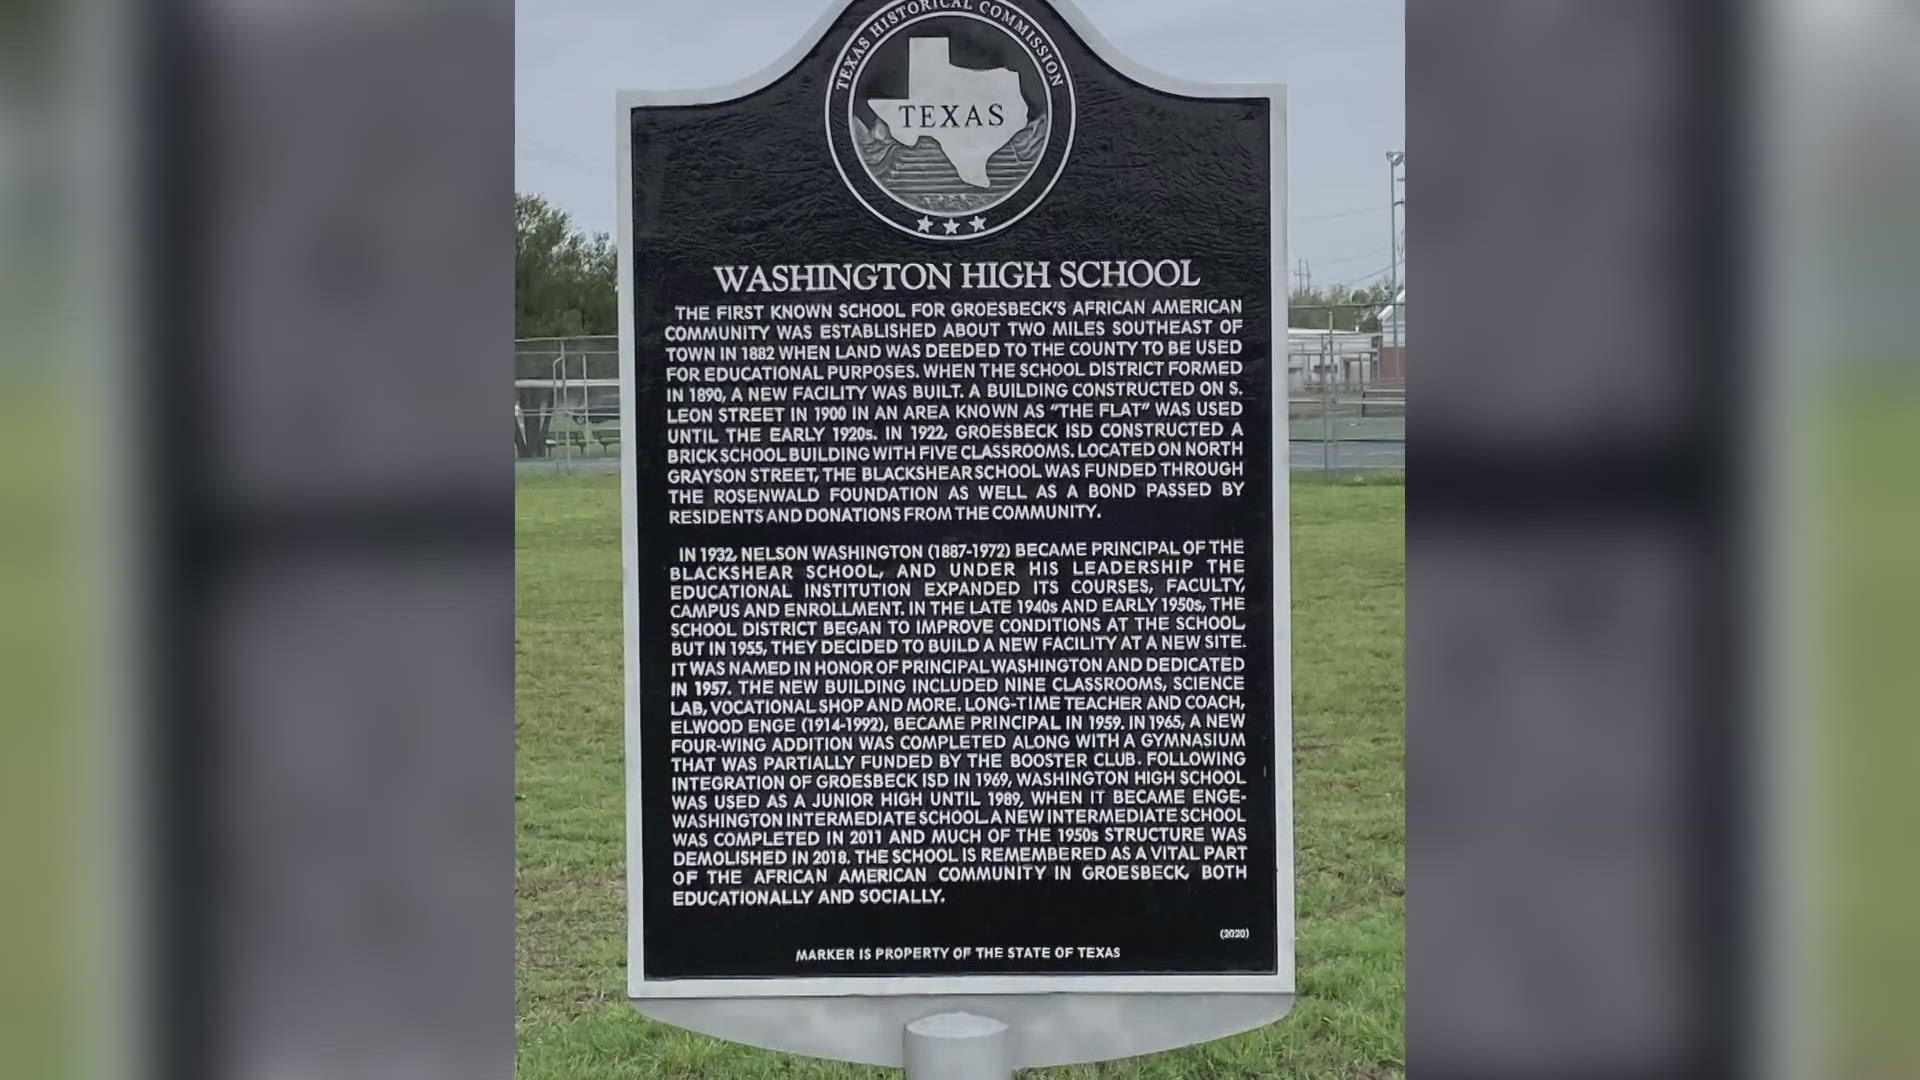 In the 1950s, Washington High School was an institution of learning for African-American students within Groesbeck ISD. Now in 2023, its legacy lives on.